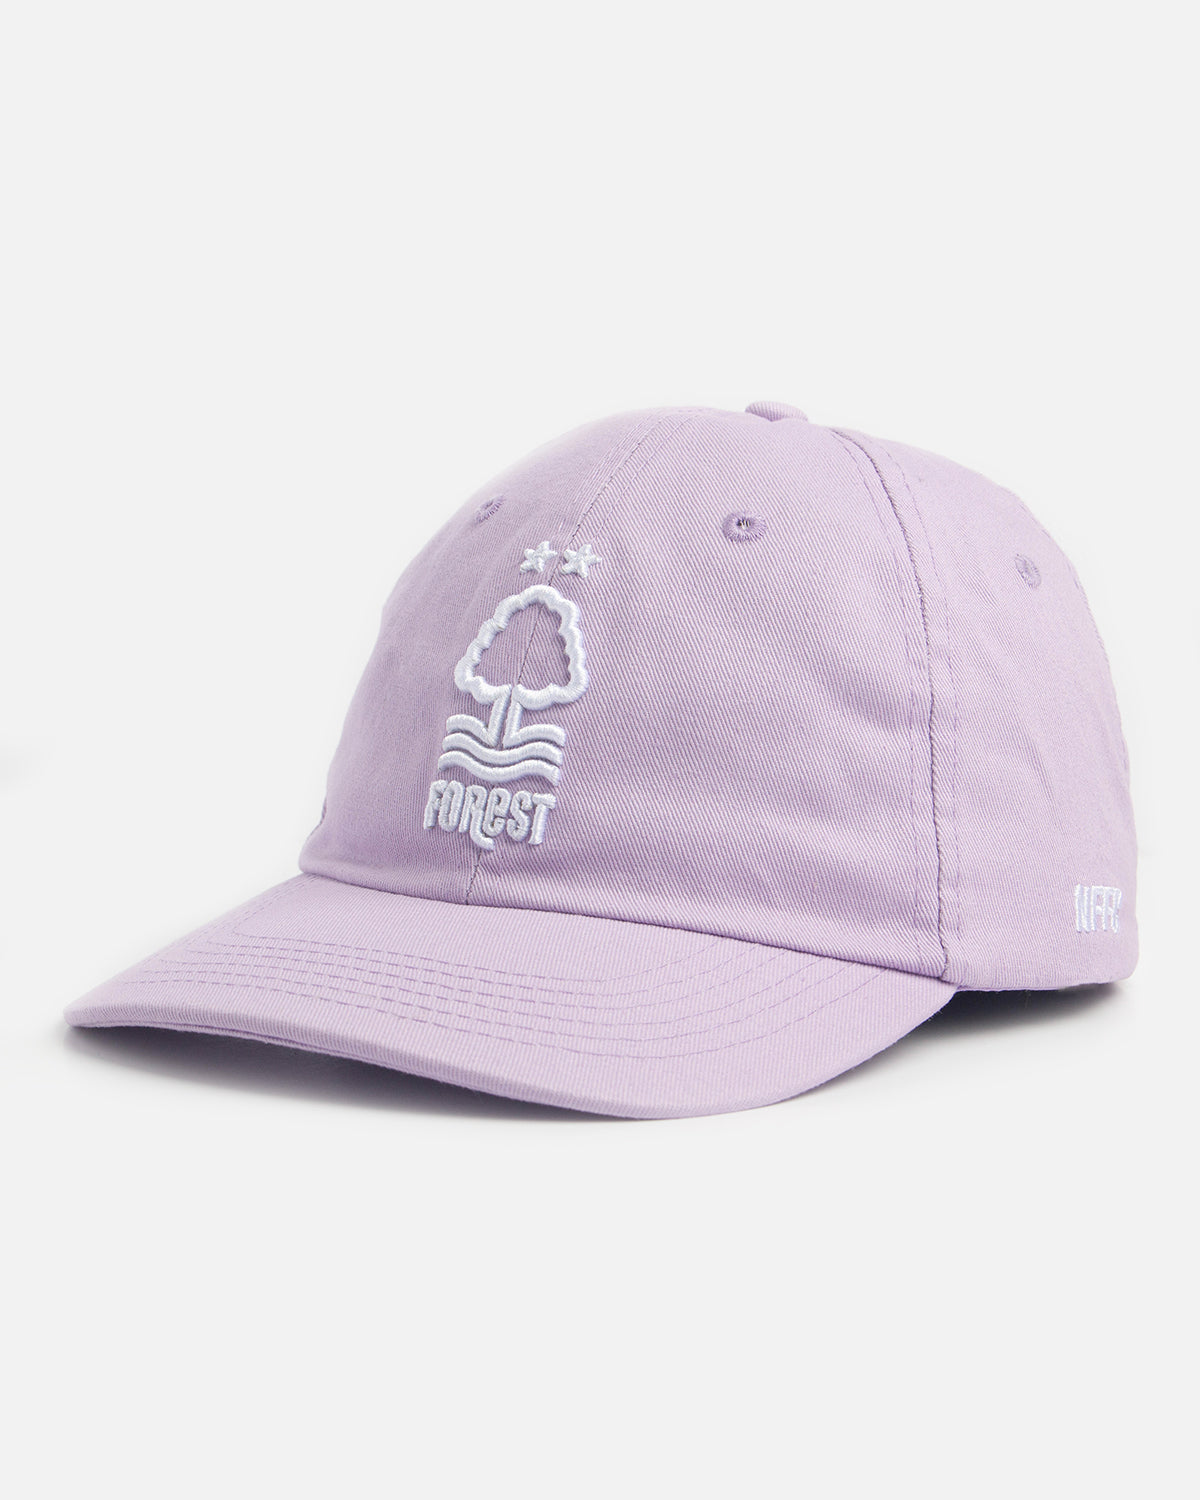 NFFC Womens Lavender Relaxed Fit Cap